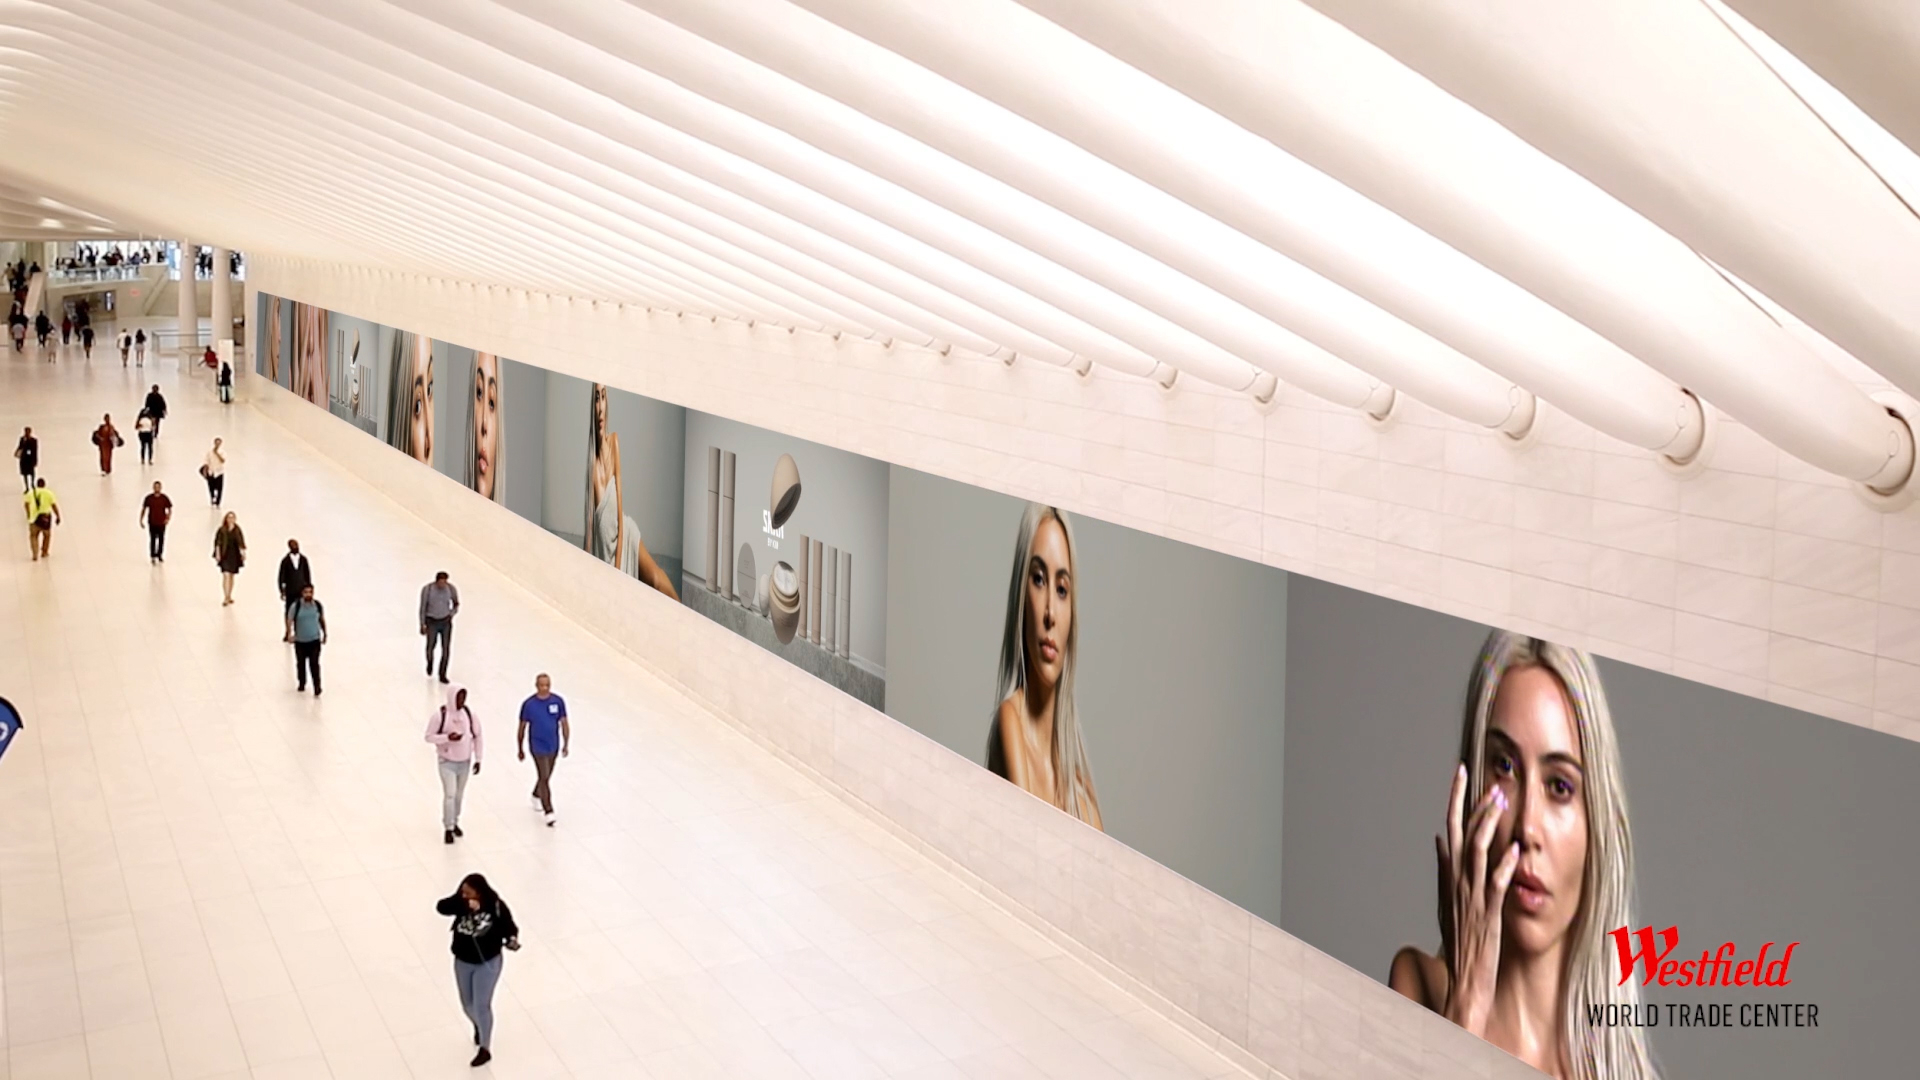 SKKN BY KIM, the skincare line developed by Kim Kardashian, launches the first 3D digital media campaign on the iconic 100-yard screen in the Oculus at Westfield World Trade Center.